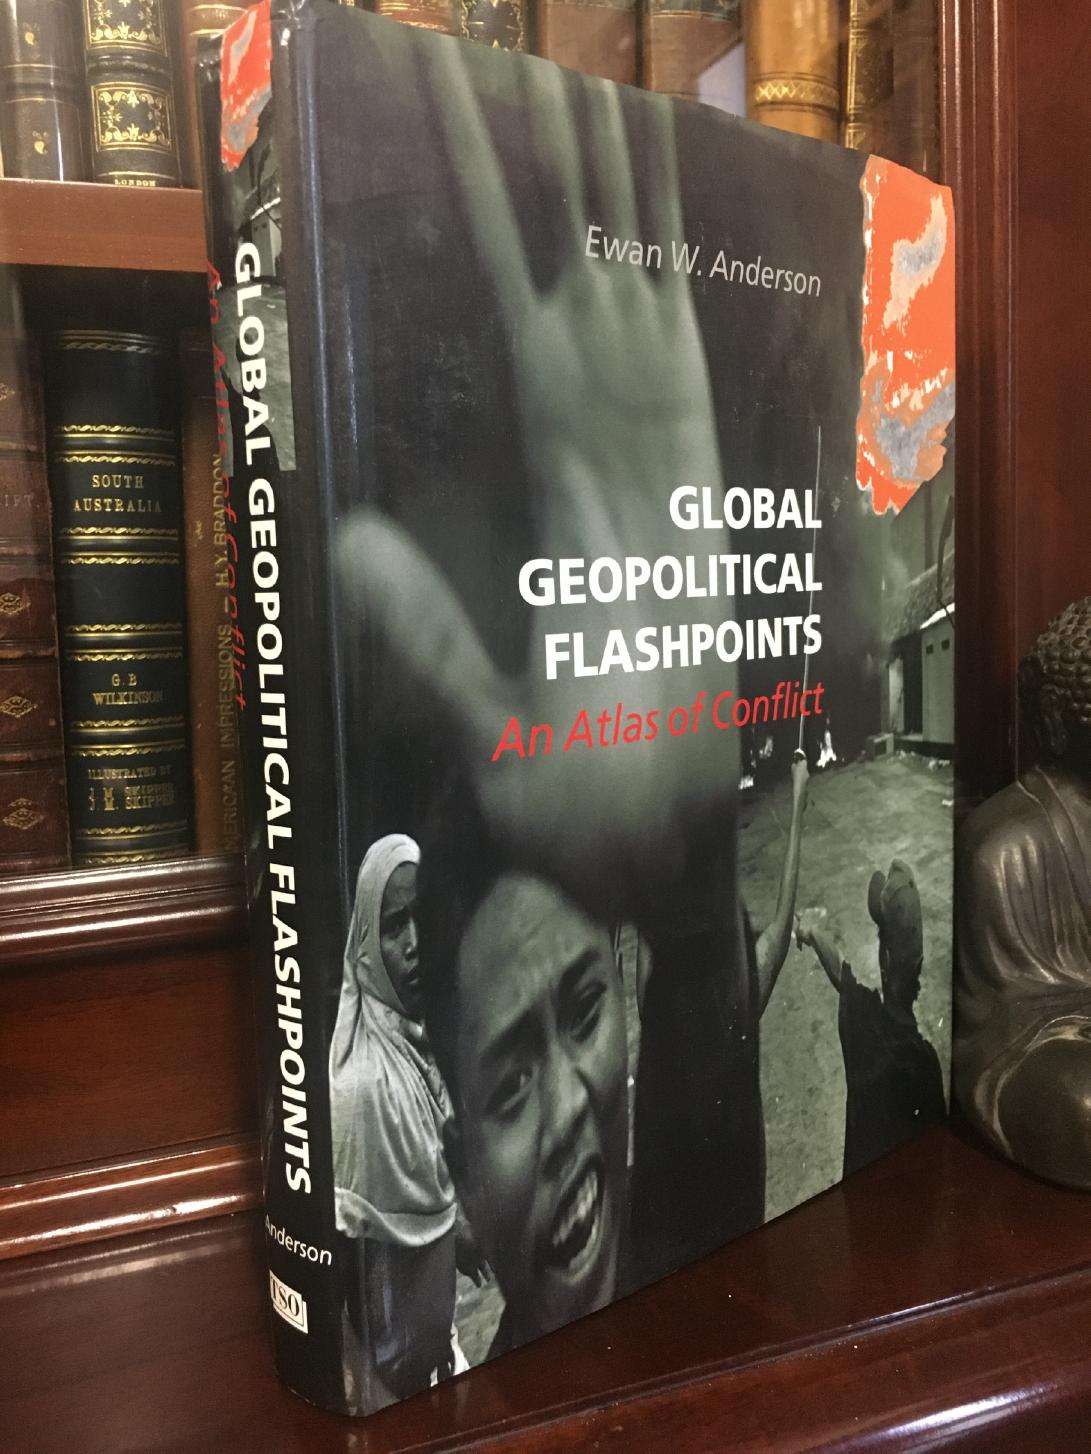 ANDERSON, EWAN W. - Global Geopolitical Flashpoints An Atlas of Conflict.